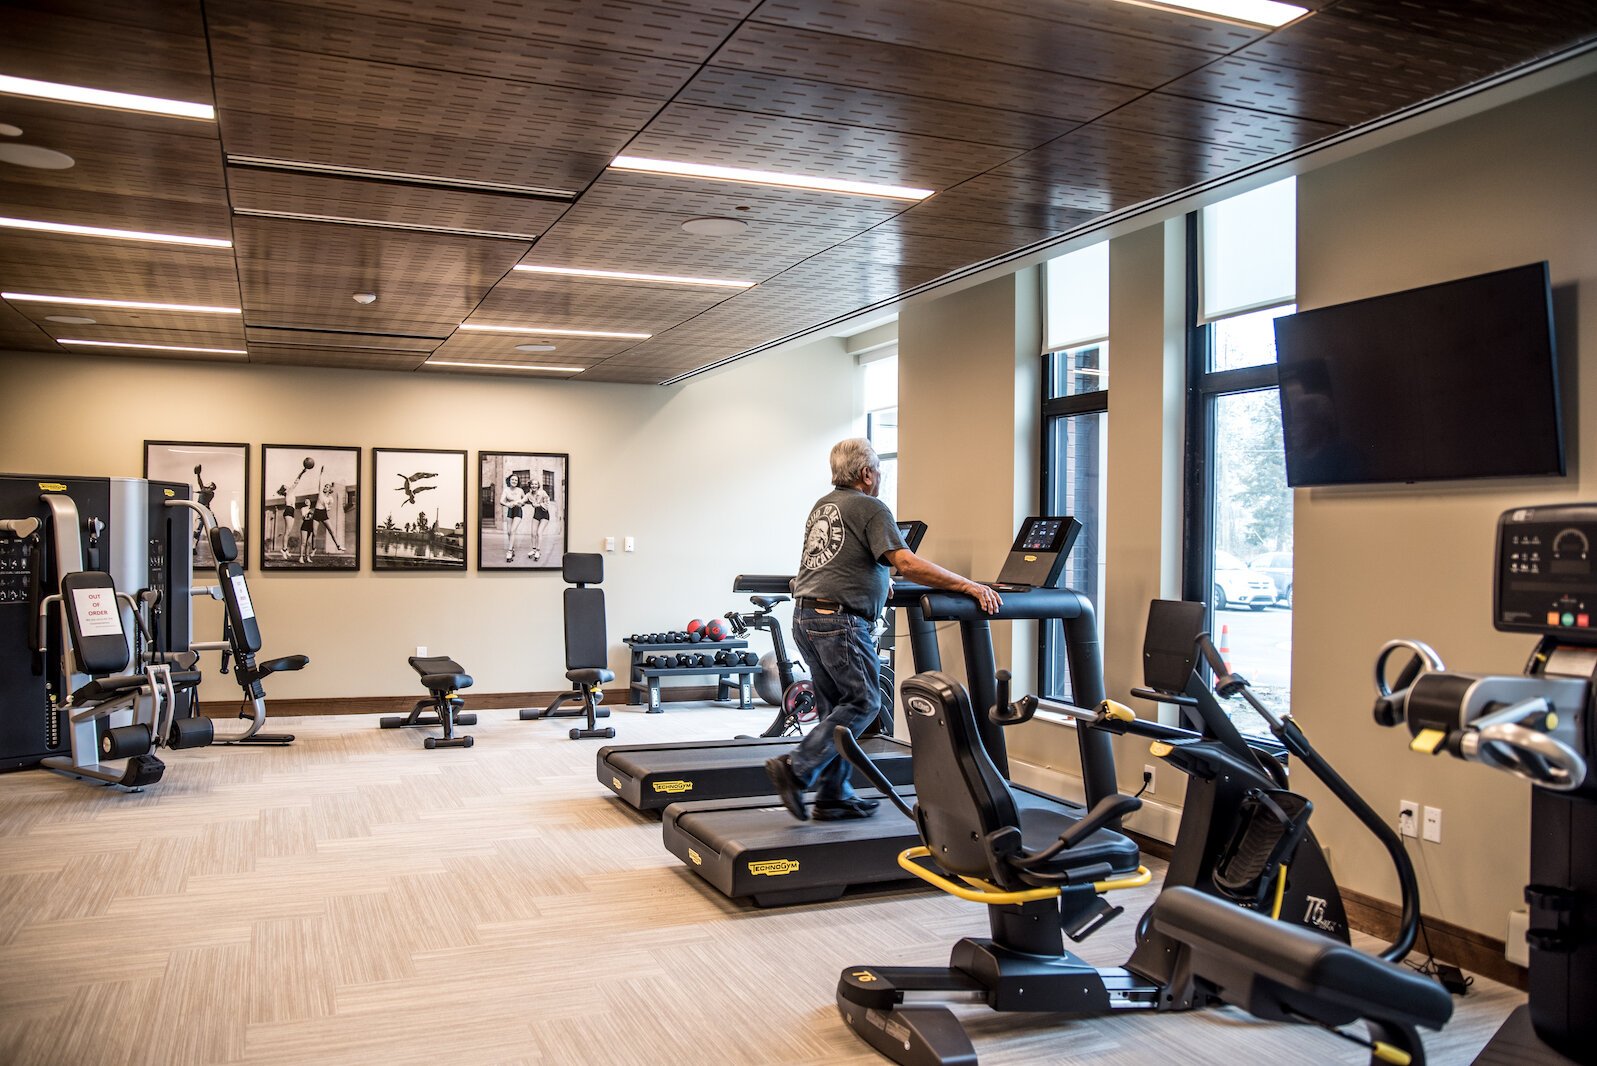 Among the amenities covered by monthly fees at Revel Creek is the use of a ground-floor fitness center, wellness programs and social, educational, and recreational activities.